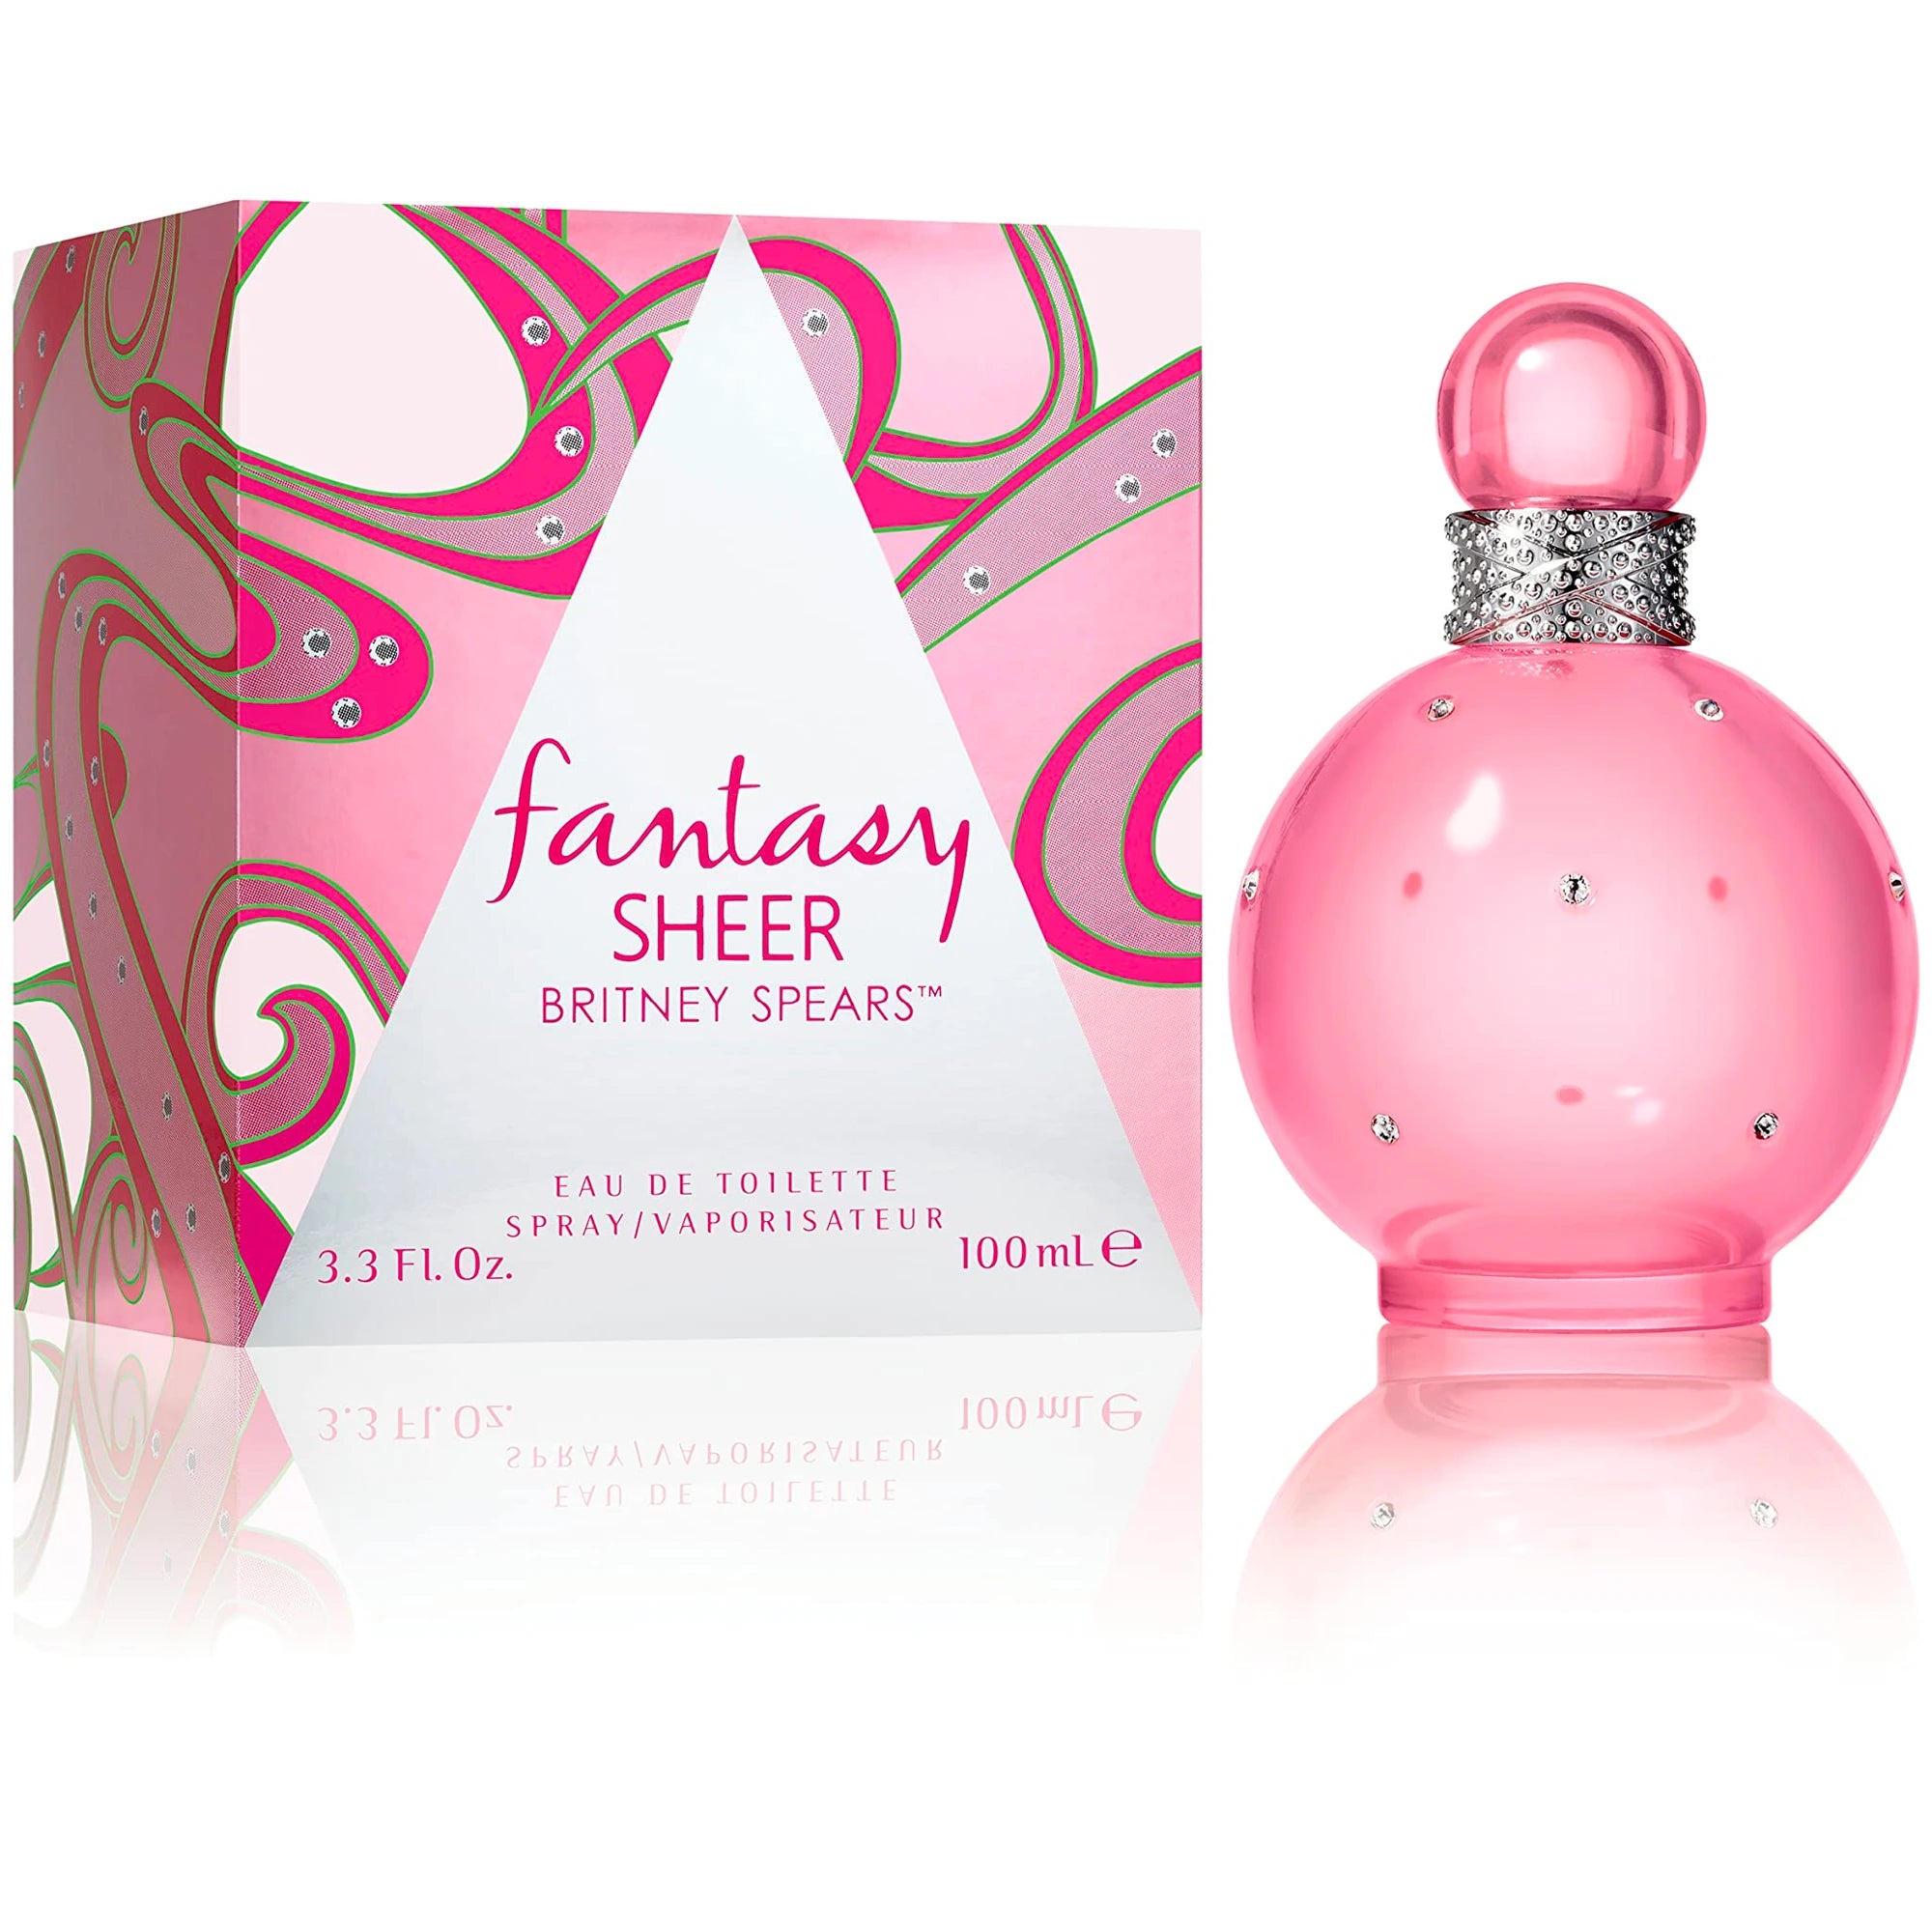 <span data-mce-fragment="1">Fantasy Sheer by Britney Spears is a Floral Fruity fragrance for women. </span><span data-mce-fragment="1">This fragrance is new. </span><span data-mce-fragment="1">Fantasy Sheer was launched in 2021. Top notes are citruses water, litchi and quince; </span><span data-mce-fragment="1">middle notes are nenúfar (water lily) and lily-of-the-valley (lily-of-the-valley); </span><span data-mce-fragment="1">base notes are cupcake, iris, white musk and woody notes.</span>